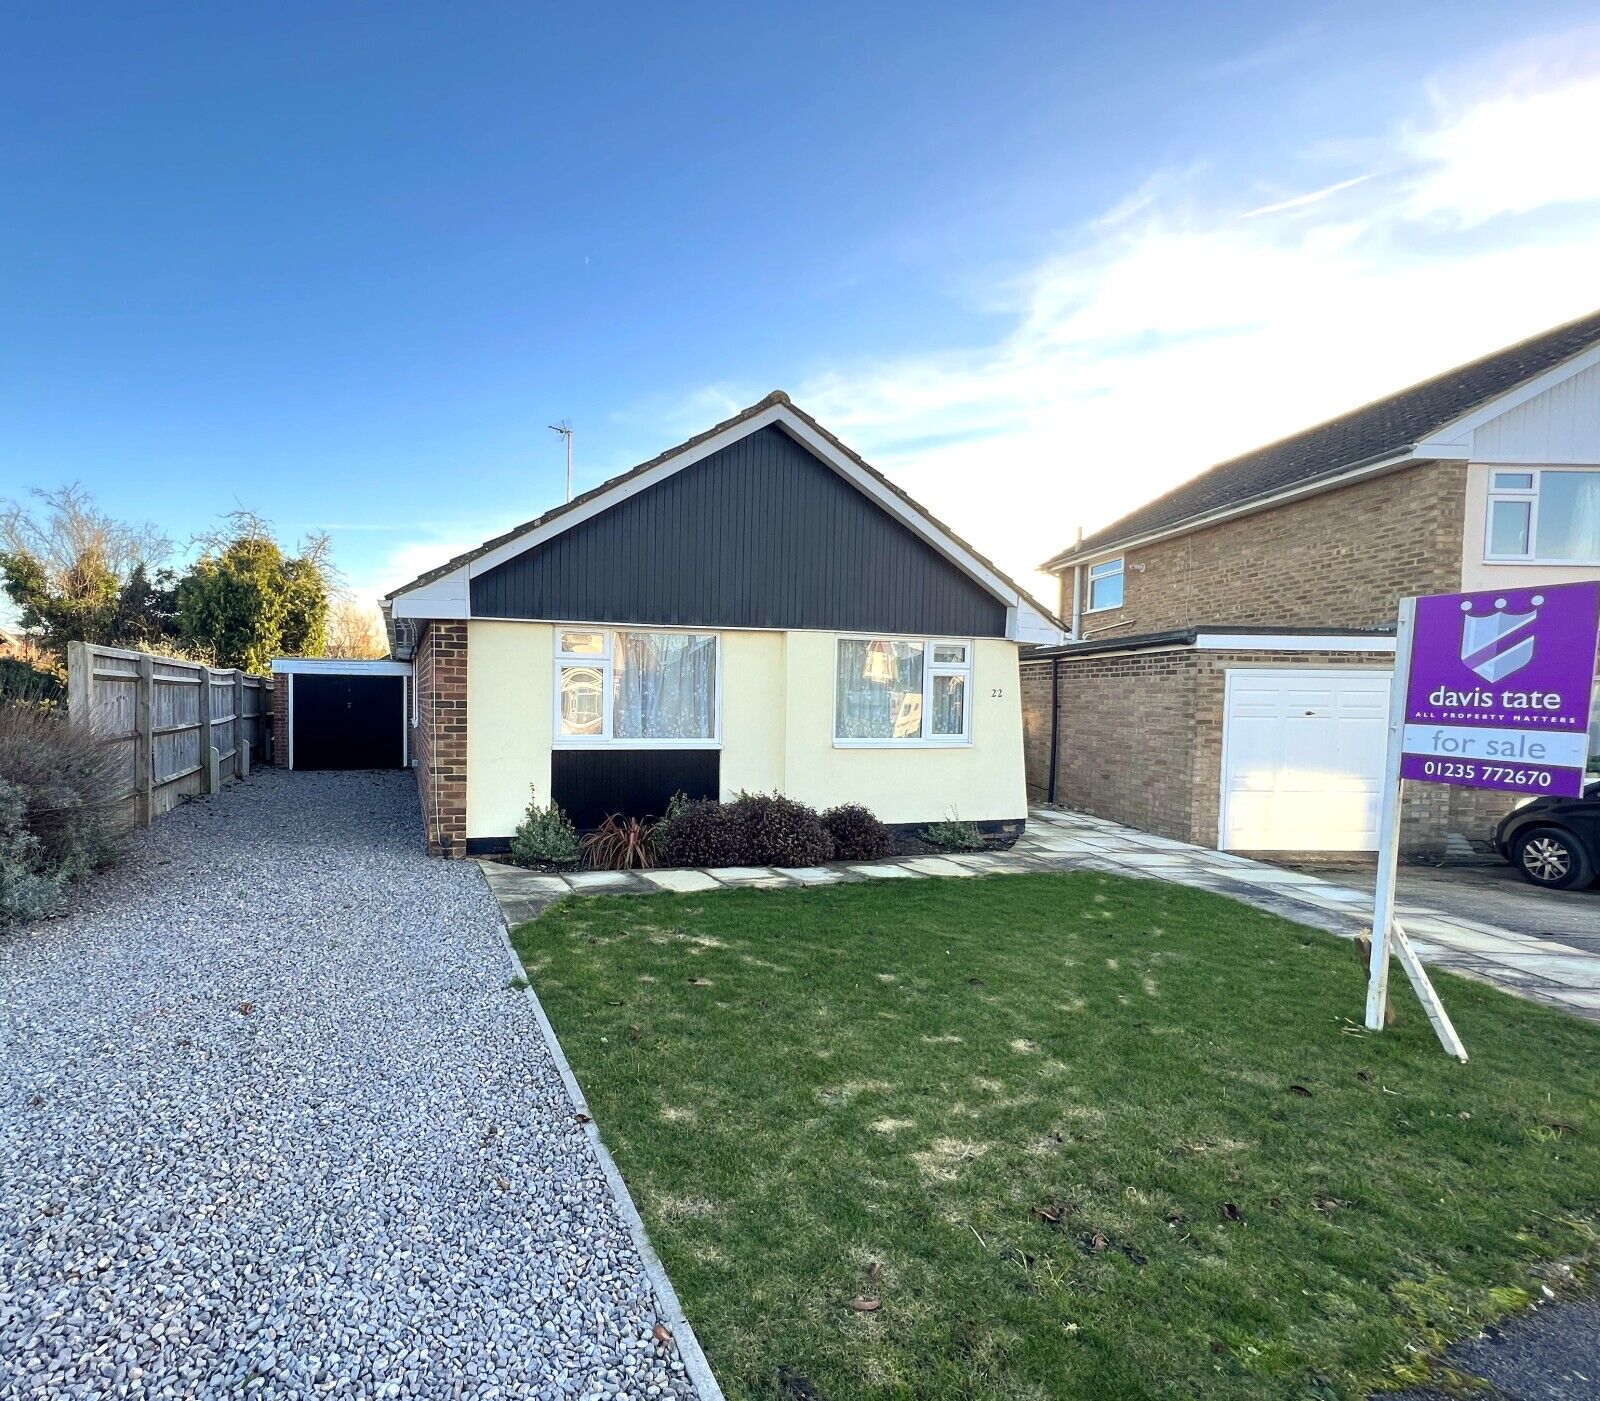 3 bedroom detached bungalow for sale Westfield Way, Wantage, OX12, main image